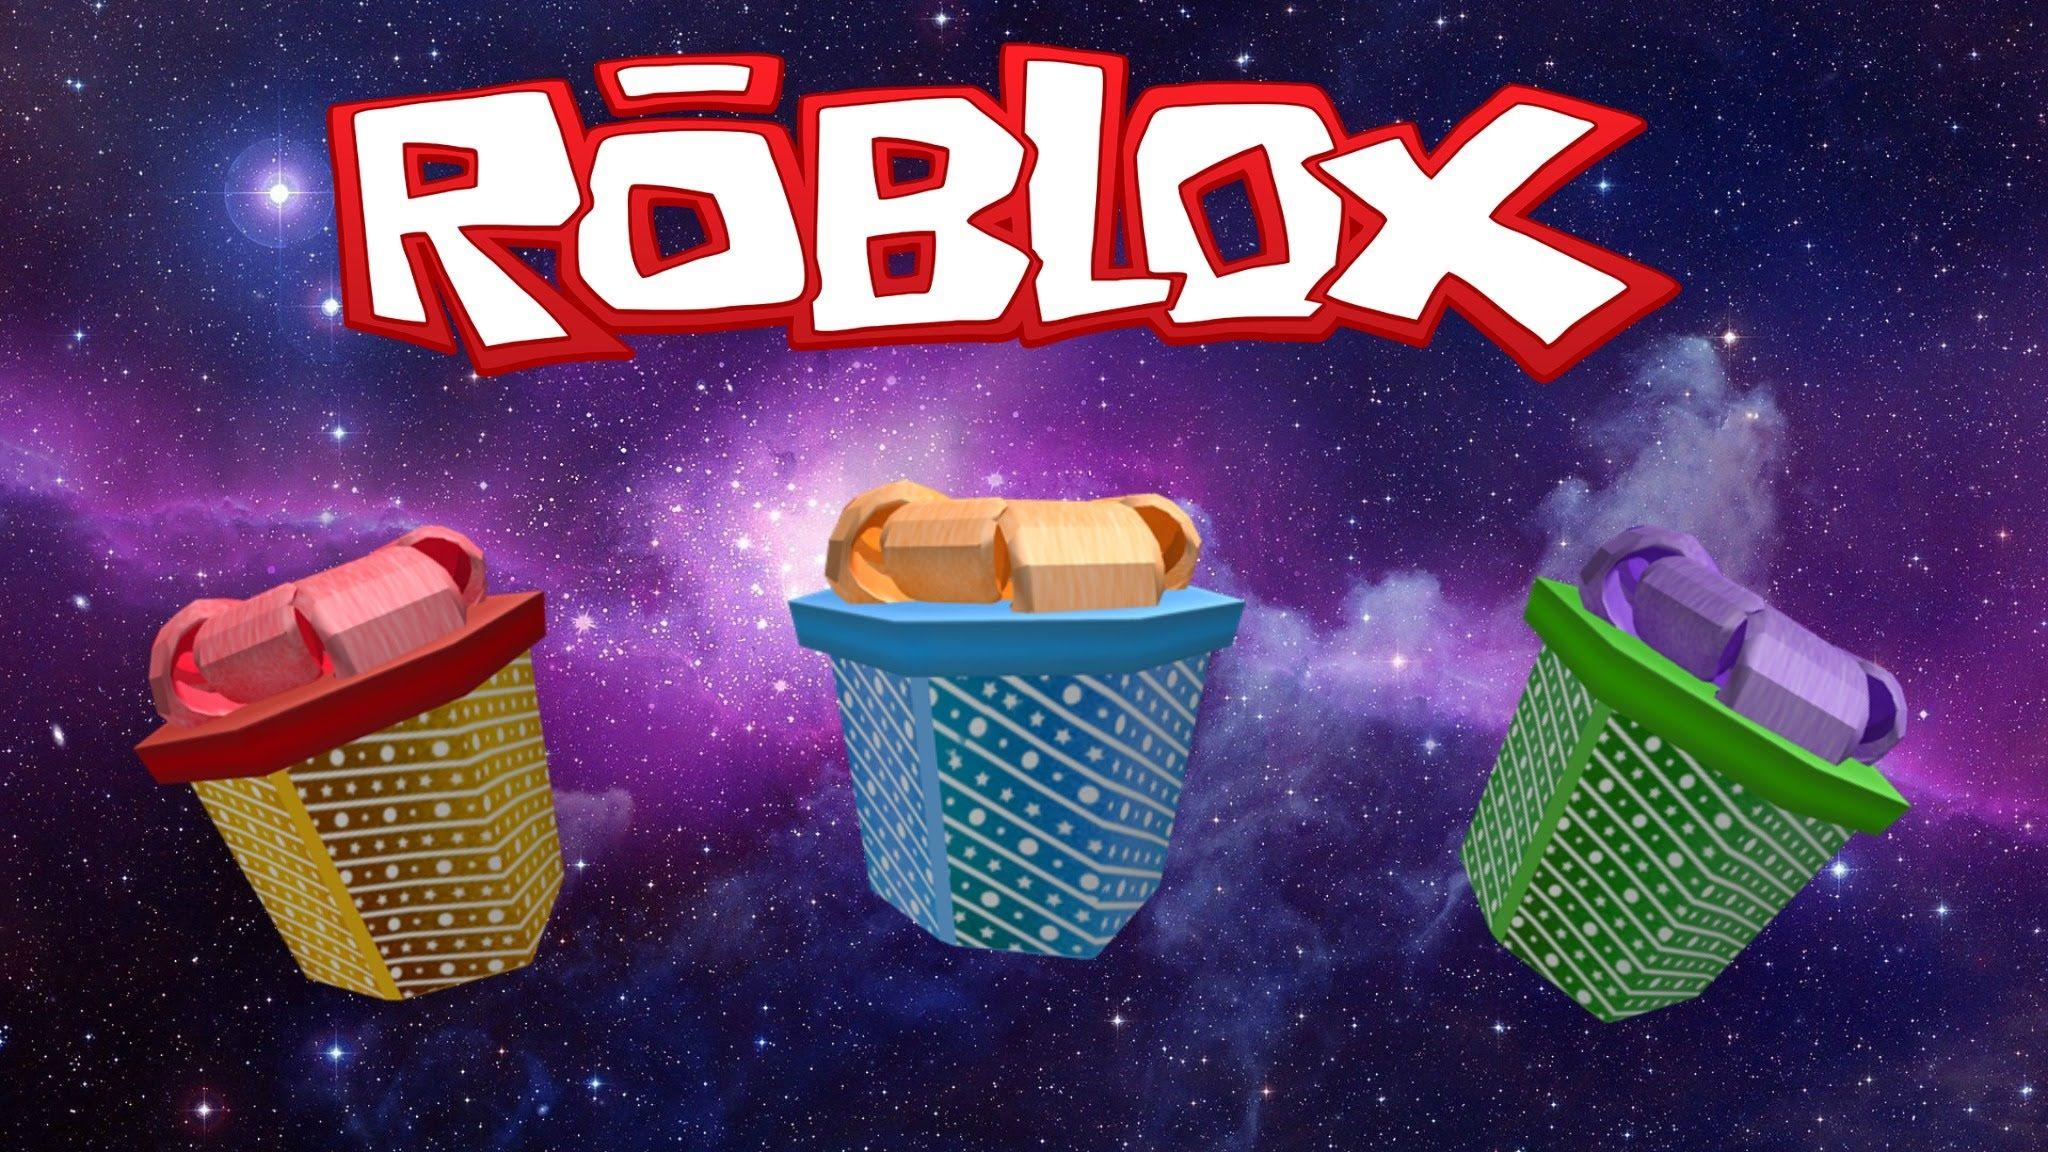 Roblox 48x1152 Wallpapers Top Free Roblox 48x1152 Backgrounds Wallpaperaccess